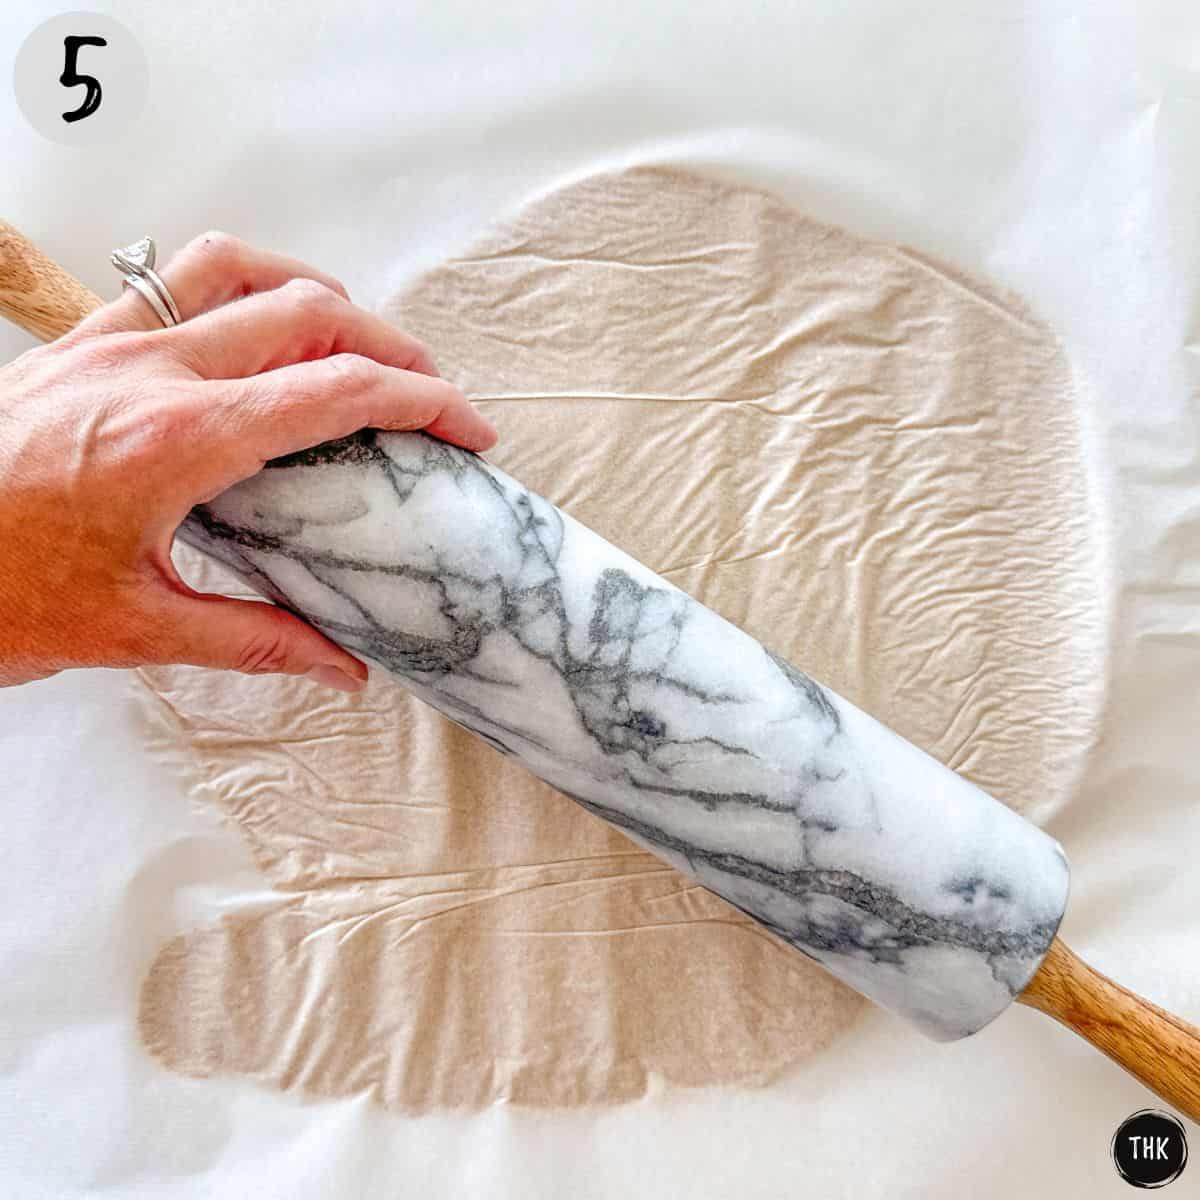 Rolling pin stretching out dough in between sheets of parchment paper.